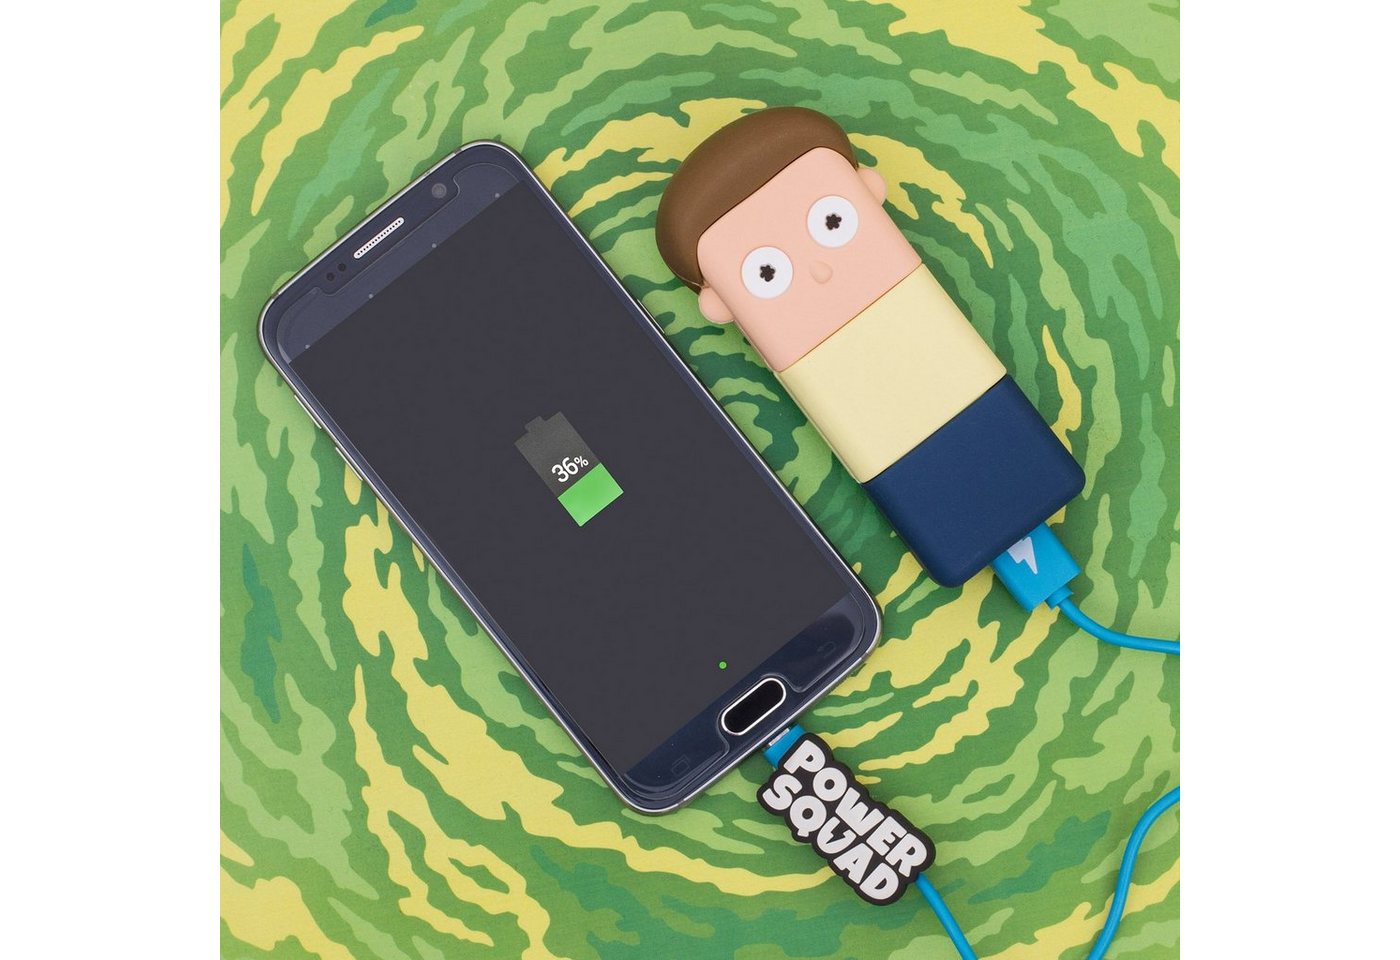 Thumbs Up PowerSquad - Powerbank CN Morty" - Cartoon Network Powerbank Powerbank 2500 mAh" von Thumbs Up